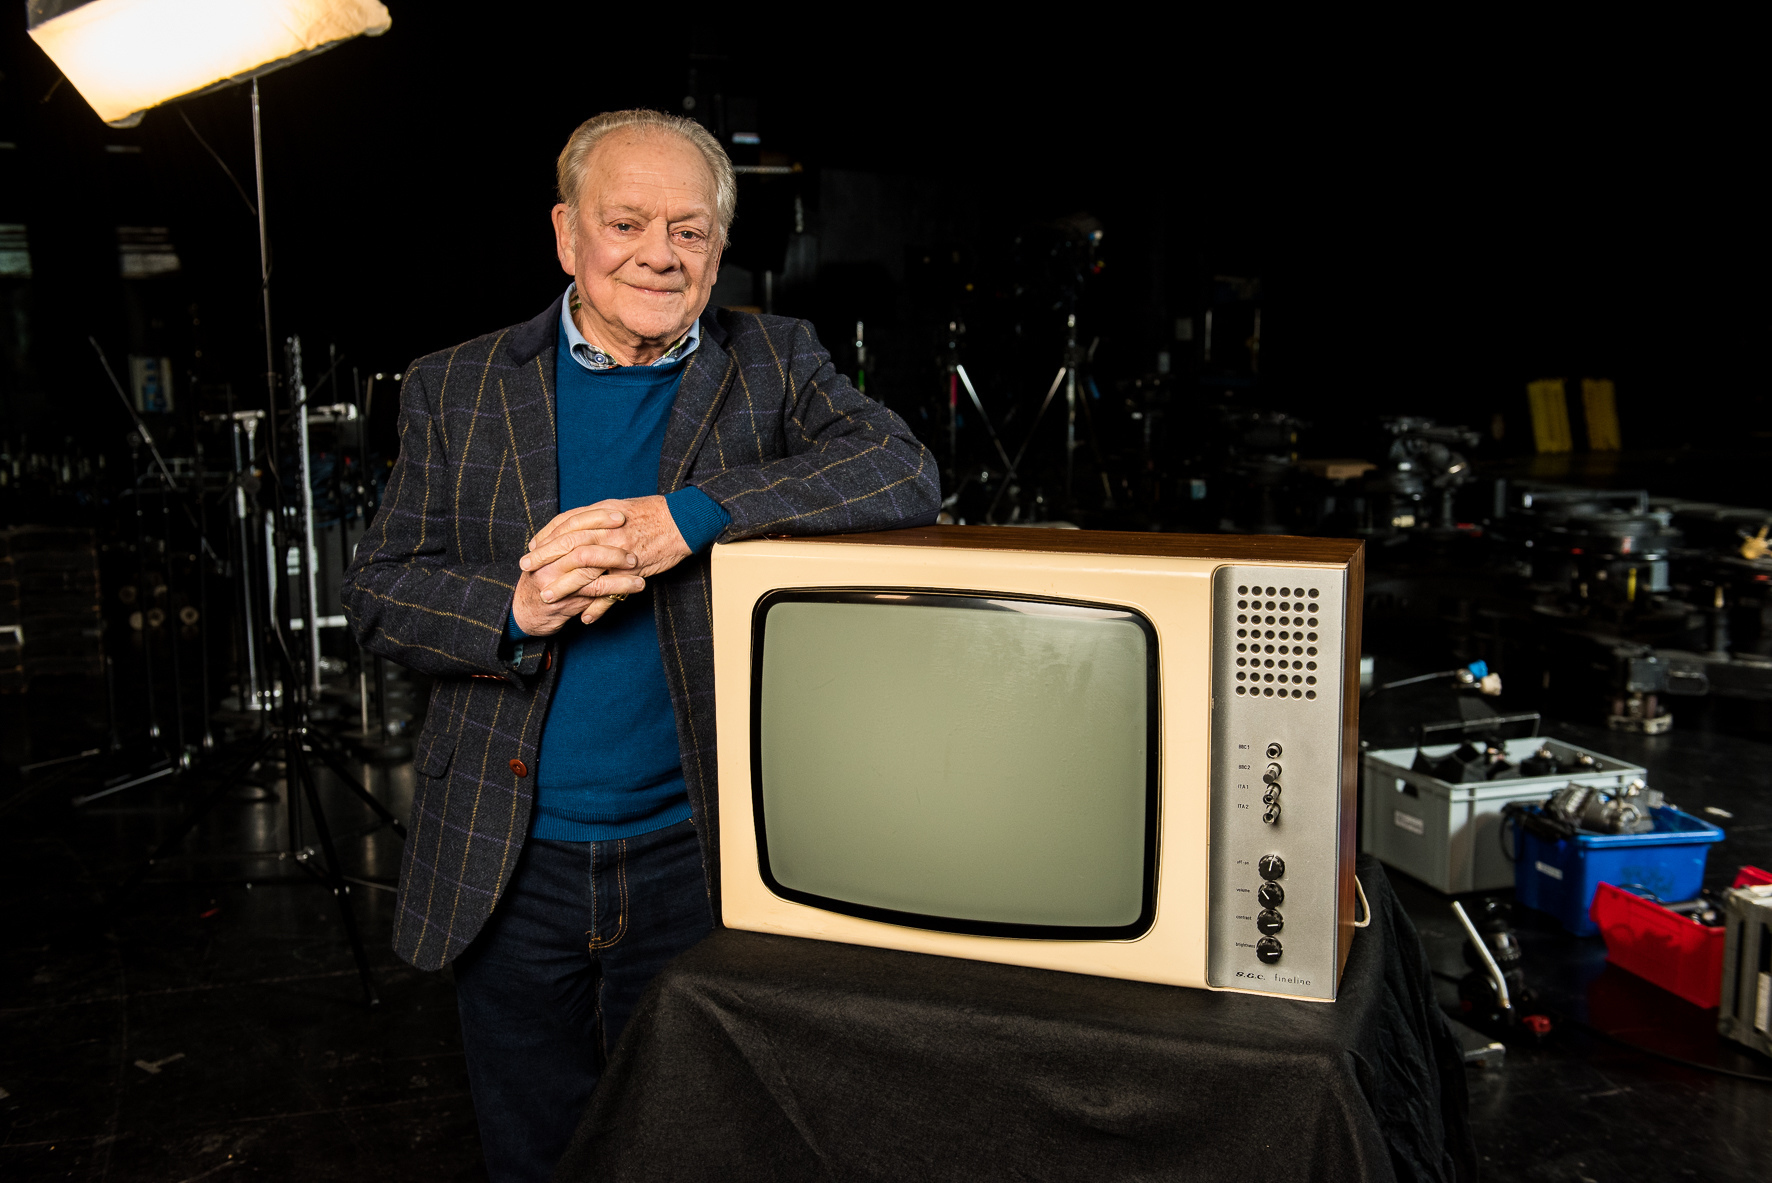 Sir David Jason has been an on-screen favourite for 50 years (UKTV/PA)